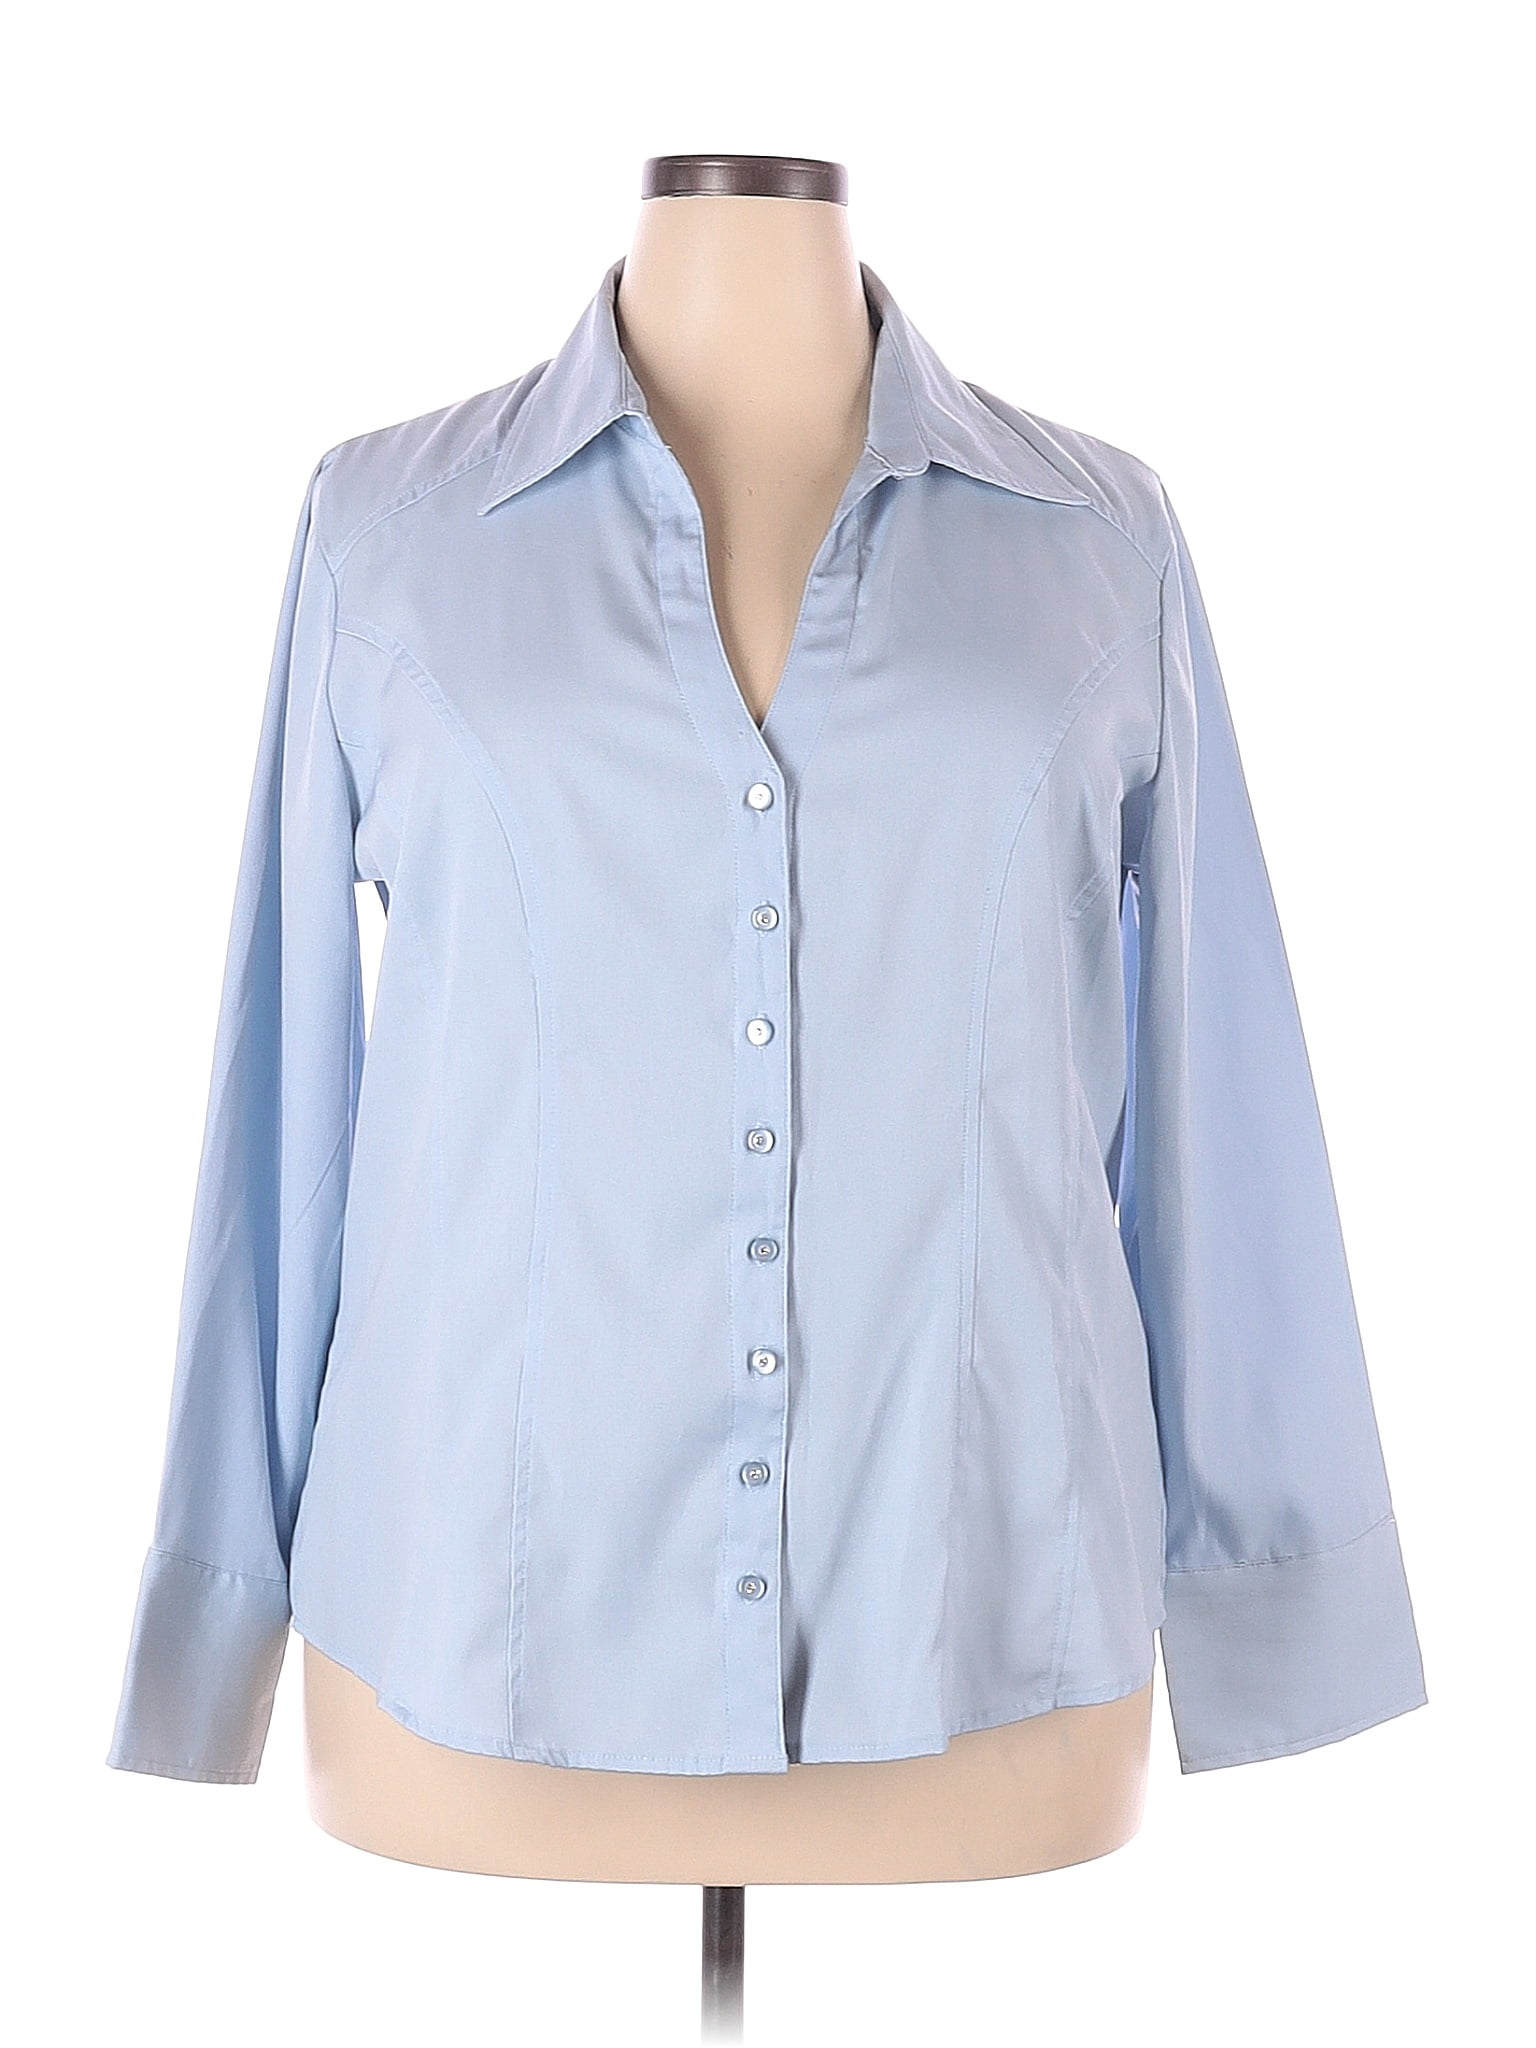 Cato Blue Long Sleeve Button-Down Shirt Size 18 - 20 (Plus) - 33% off ...